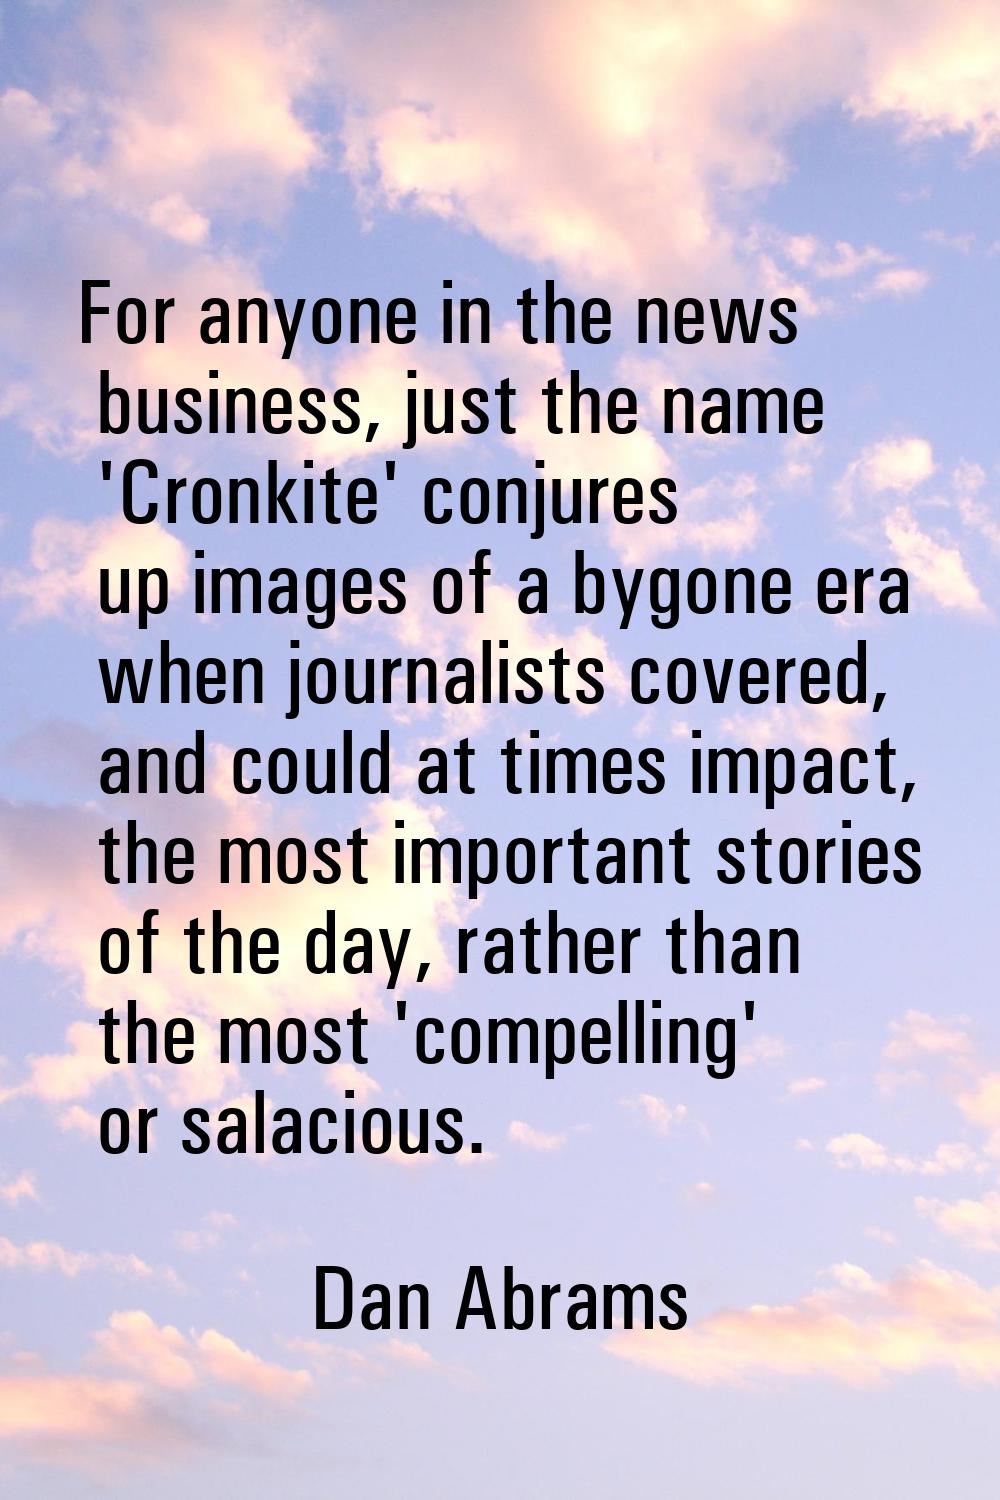 For anyone in the news business, just the name 'Cronkite' conjures up images of a bygone era when j